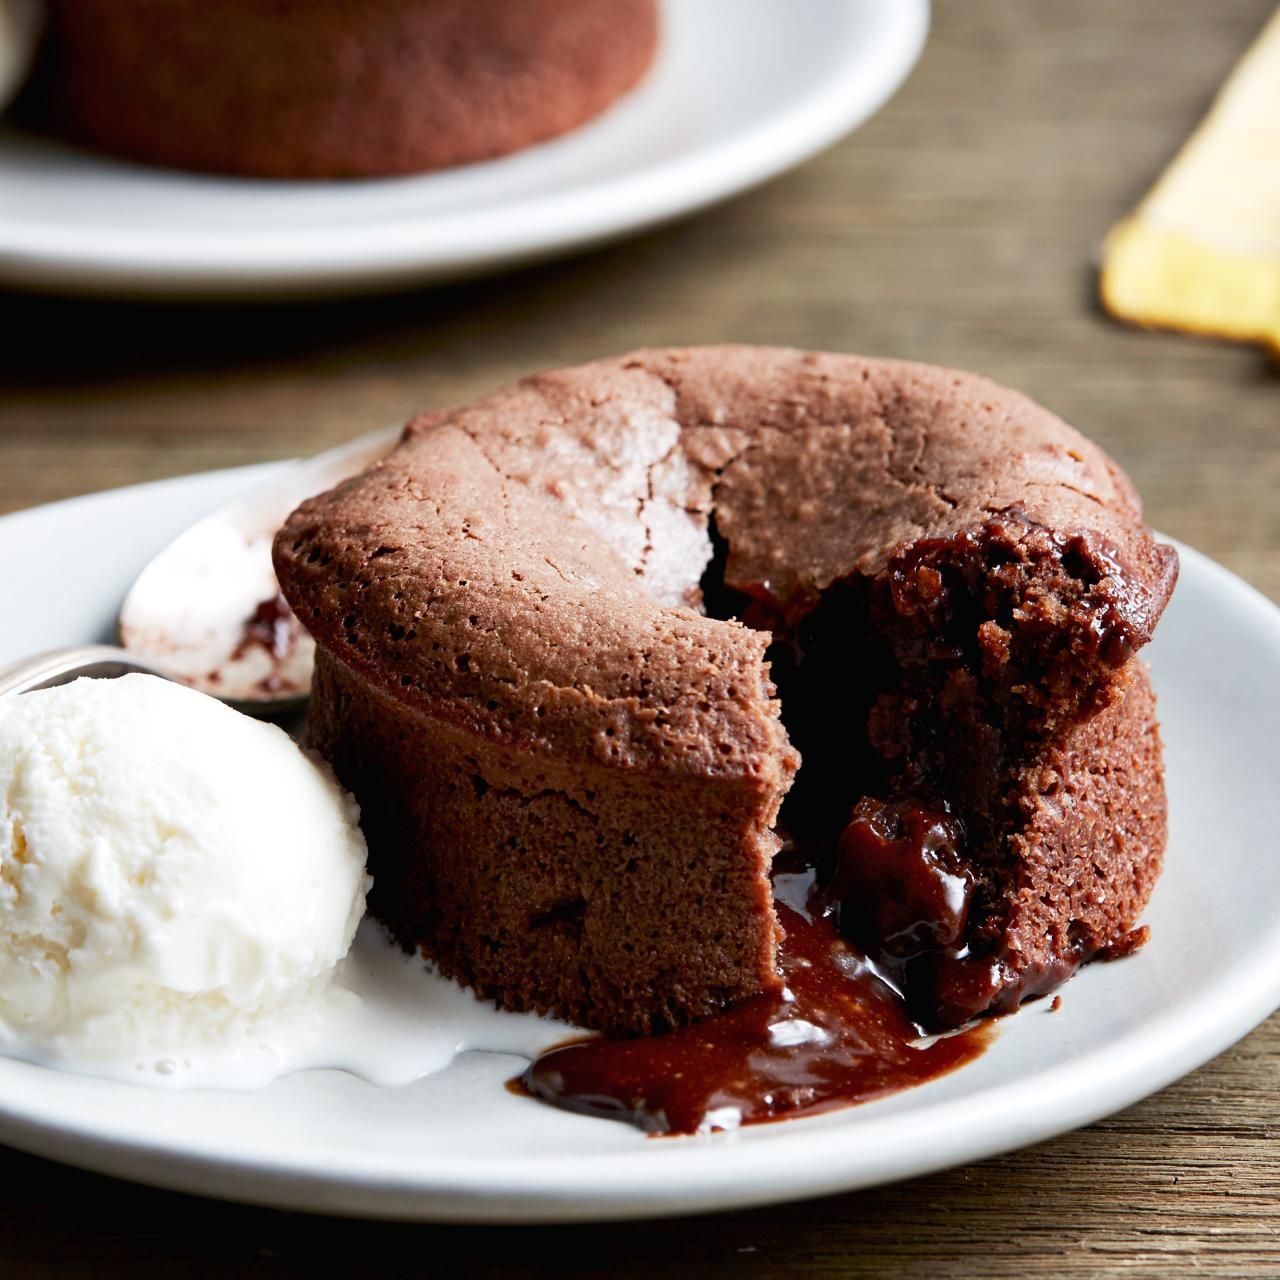 Ad* cooking a lava cake in a Sur La Table Kitchen Essentials Air